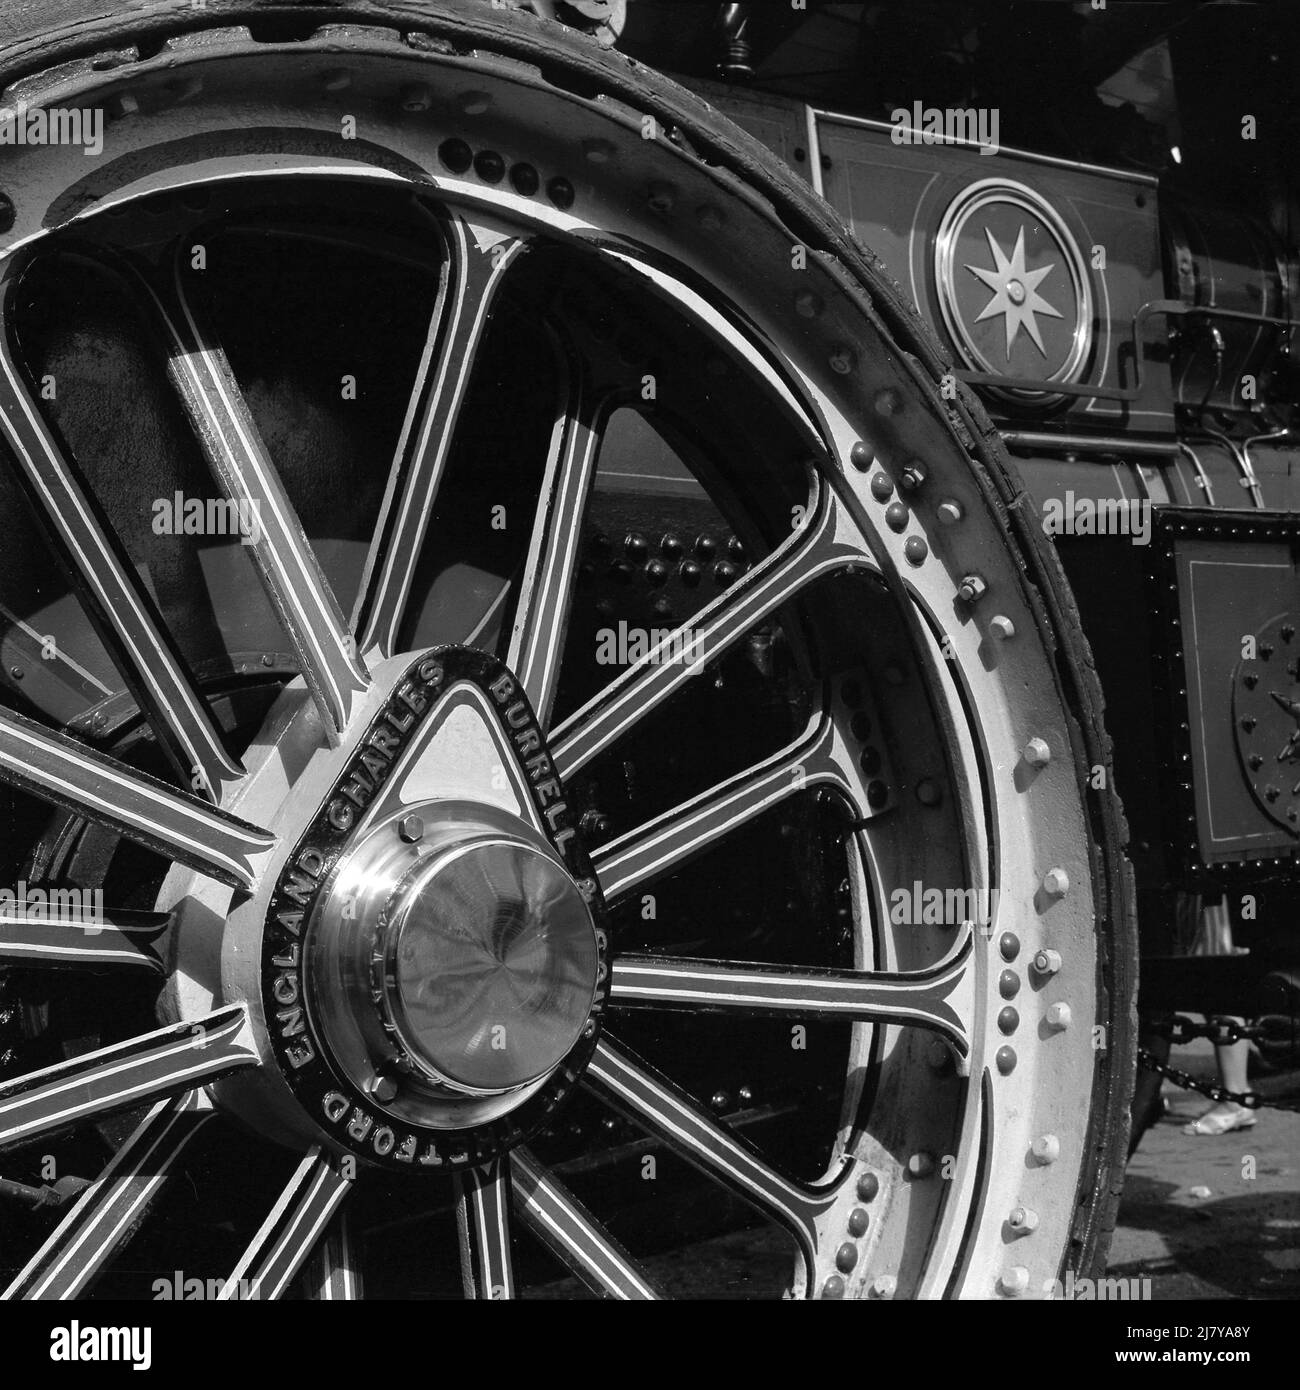 1969, historical, a close-up of a wheel on a steam tractor engine, made by Charles Burrell & Sons, whose name is seen on the wheel's hub.  Founded in 1770, they were famous builders of steam tracton engines, agriculutral machinery and steam lorries, but the invention of the internal combustion engine saw sales decline and the business closed in 1928. Stock Photo